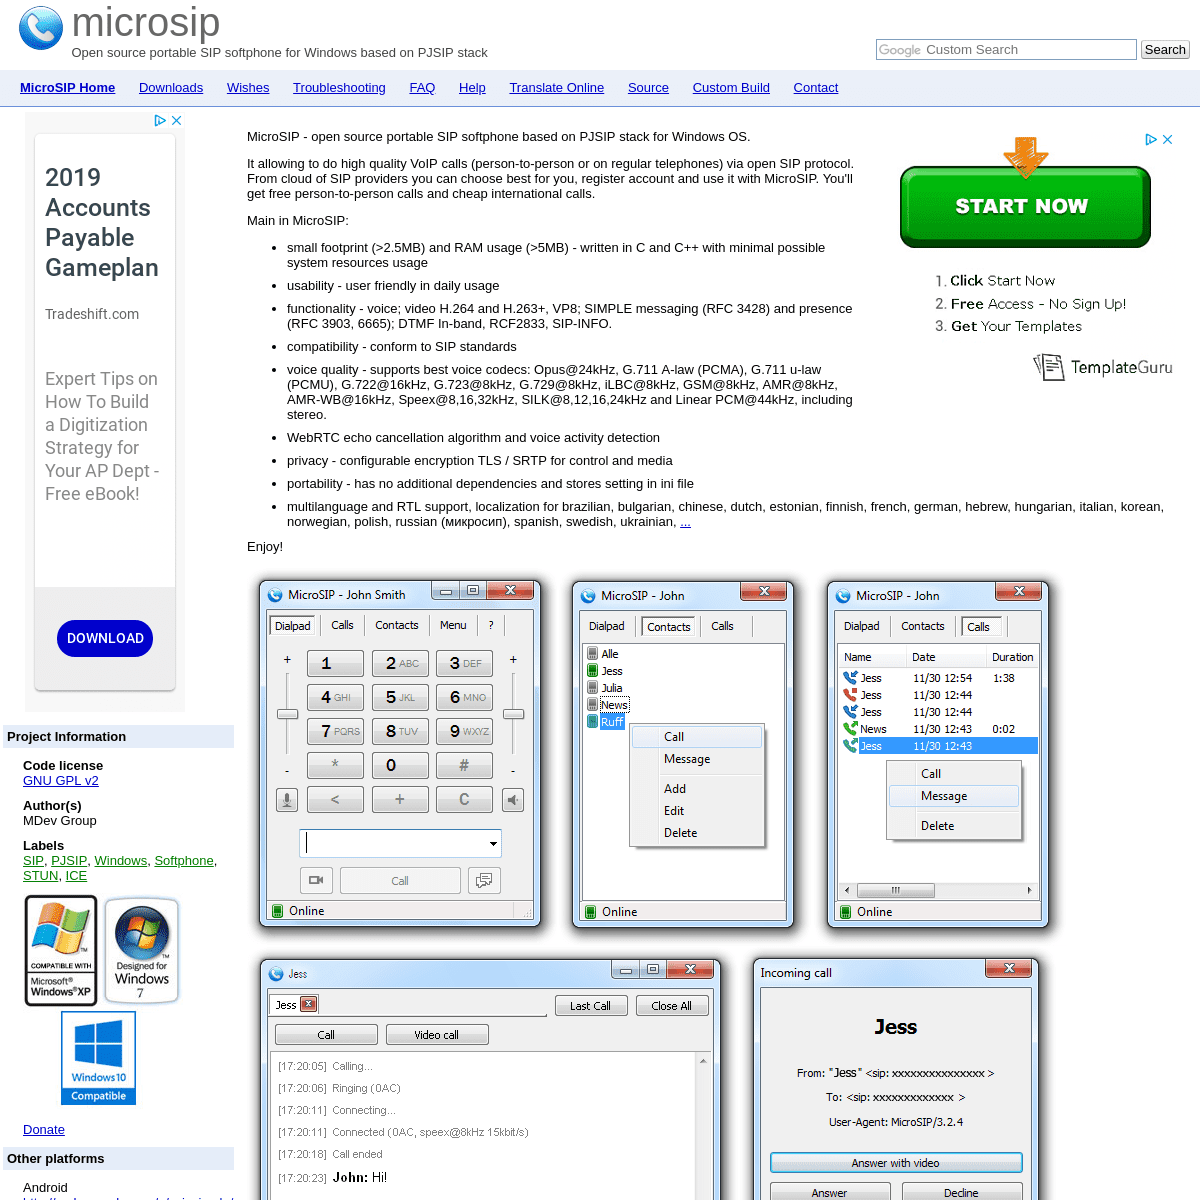 MicroSIP - lightweight VoIP SIP softphone for Windows - Official Homepage